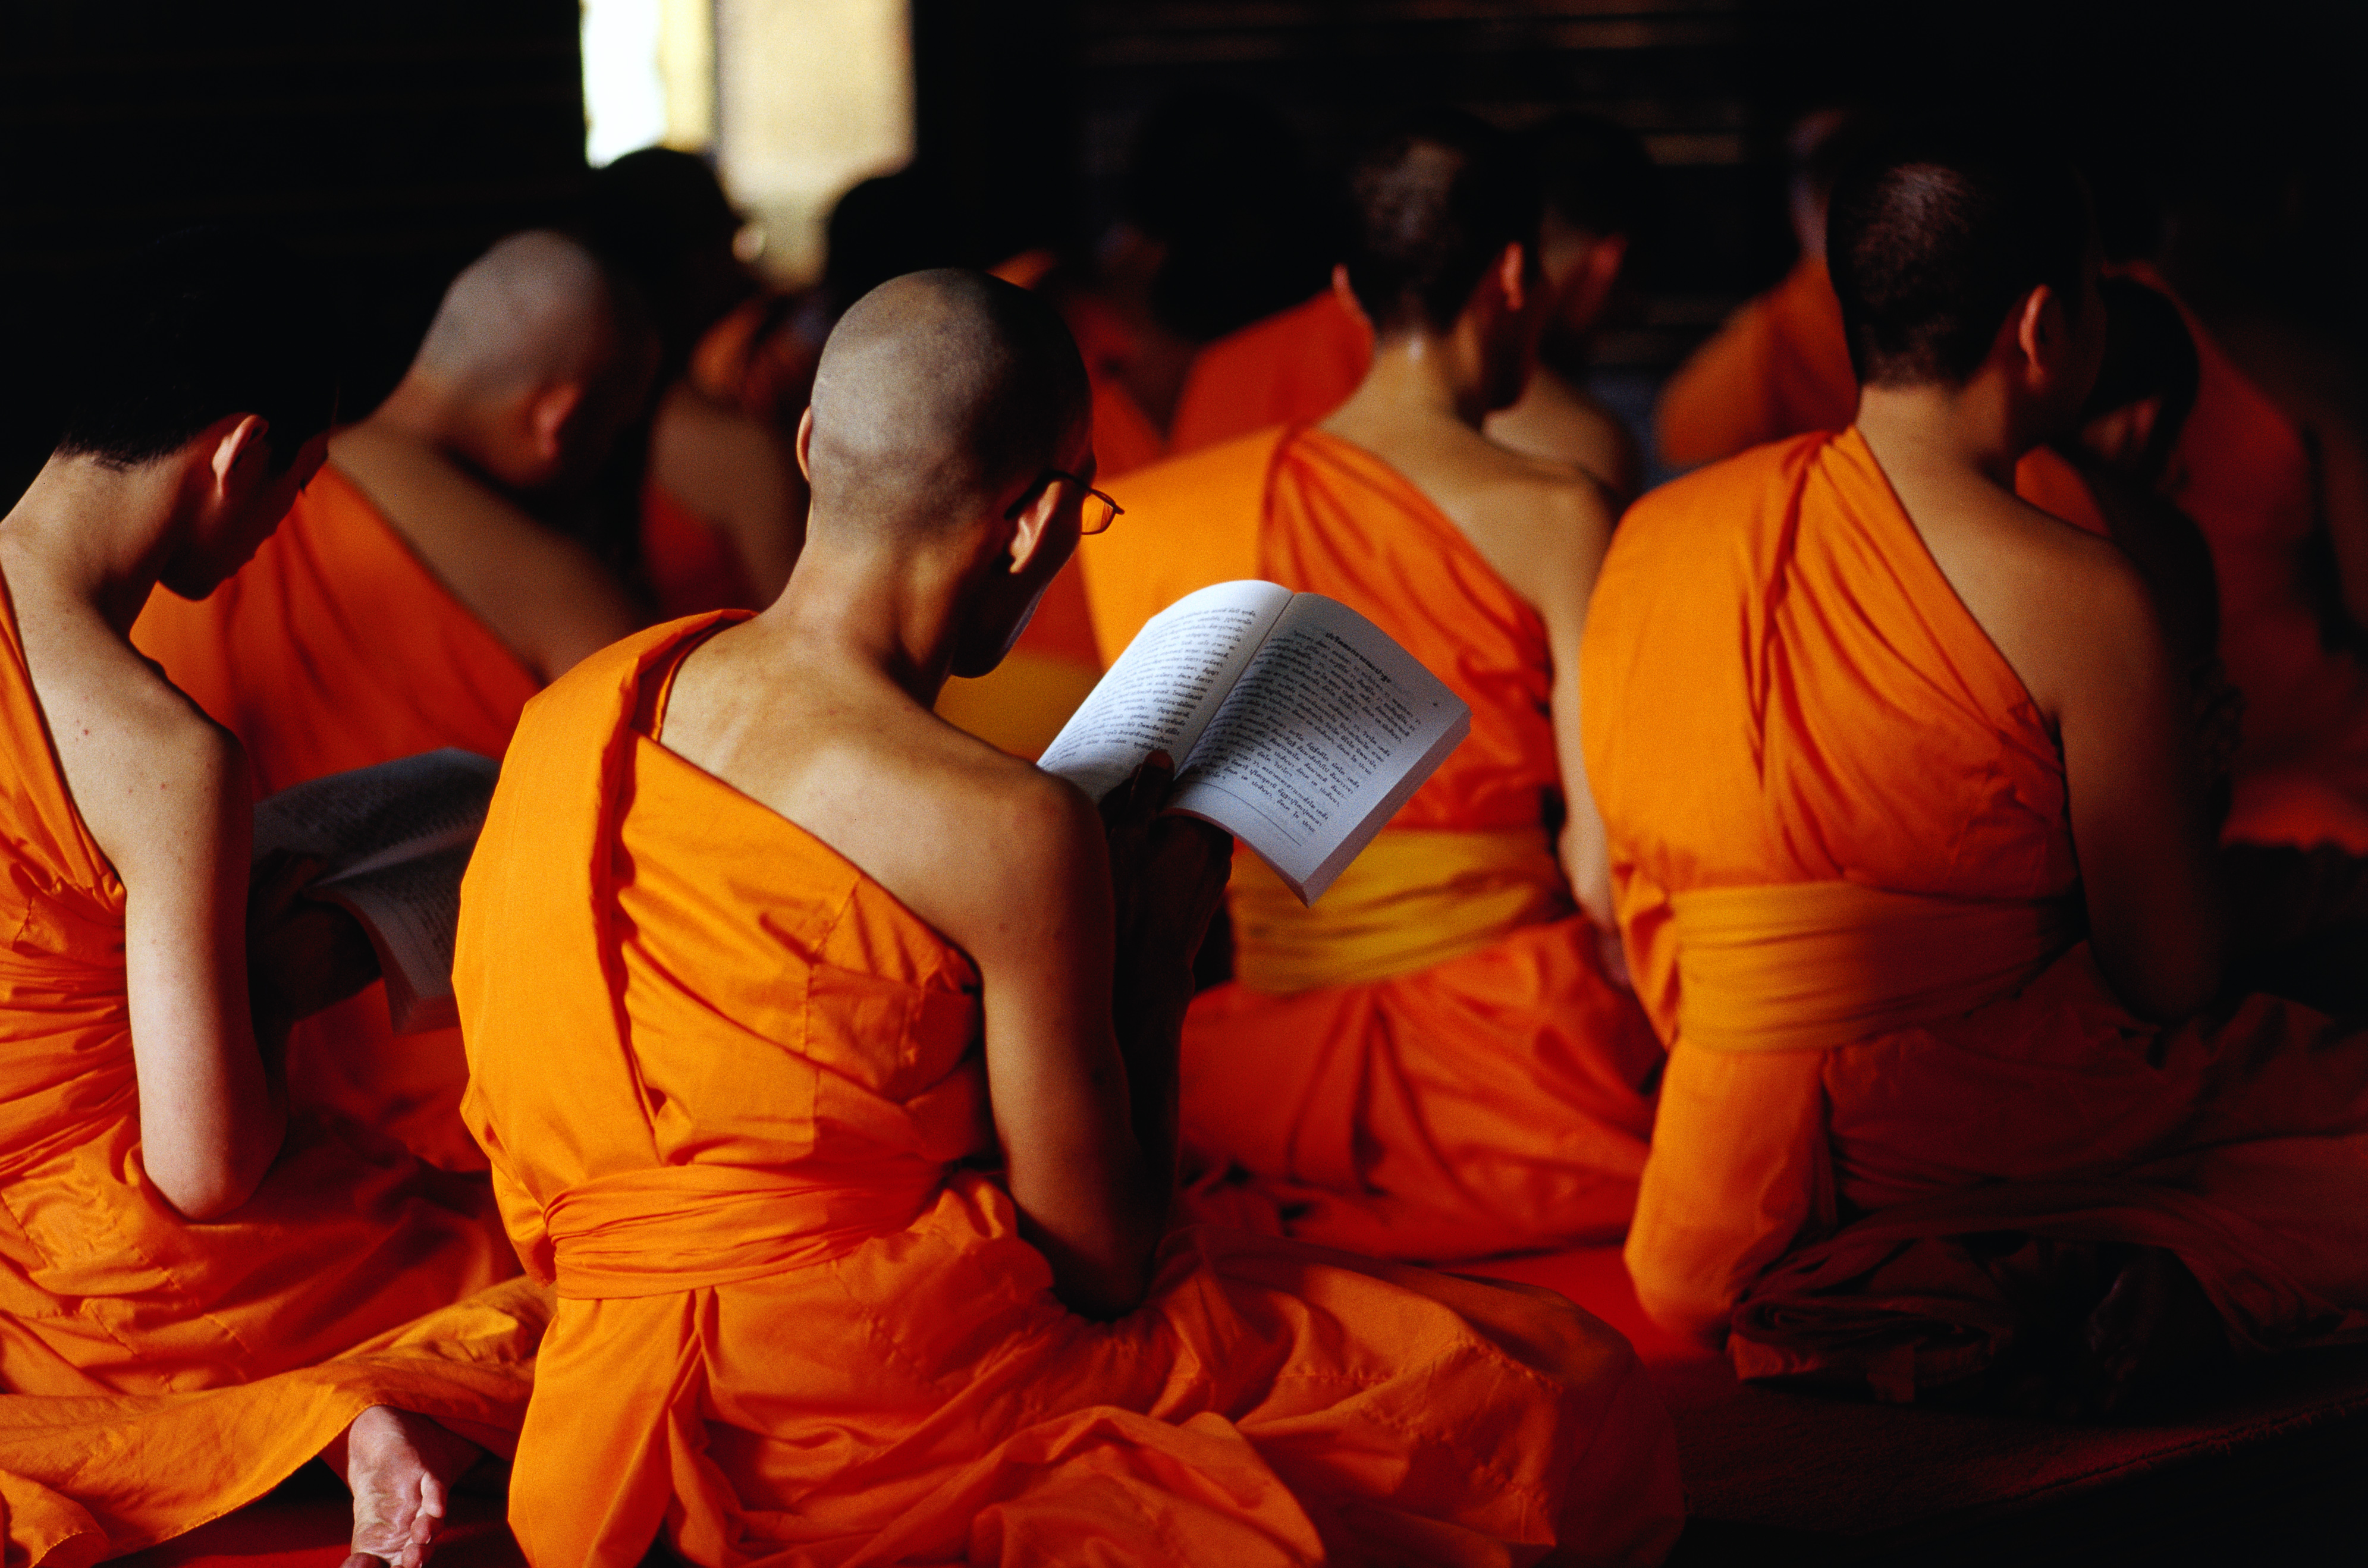 Shaved-headed monks sit cross legged at morning prayers in sermon hall at Wat Pho, some holding prayer books.